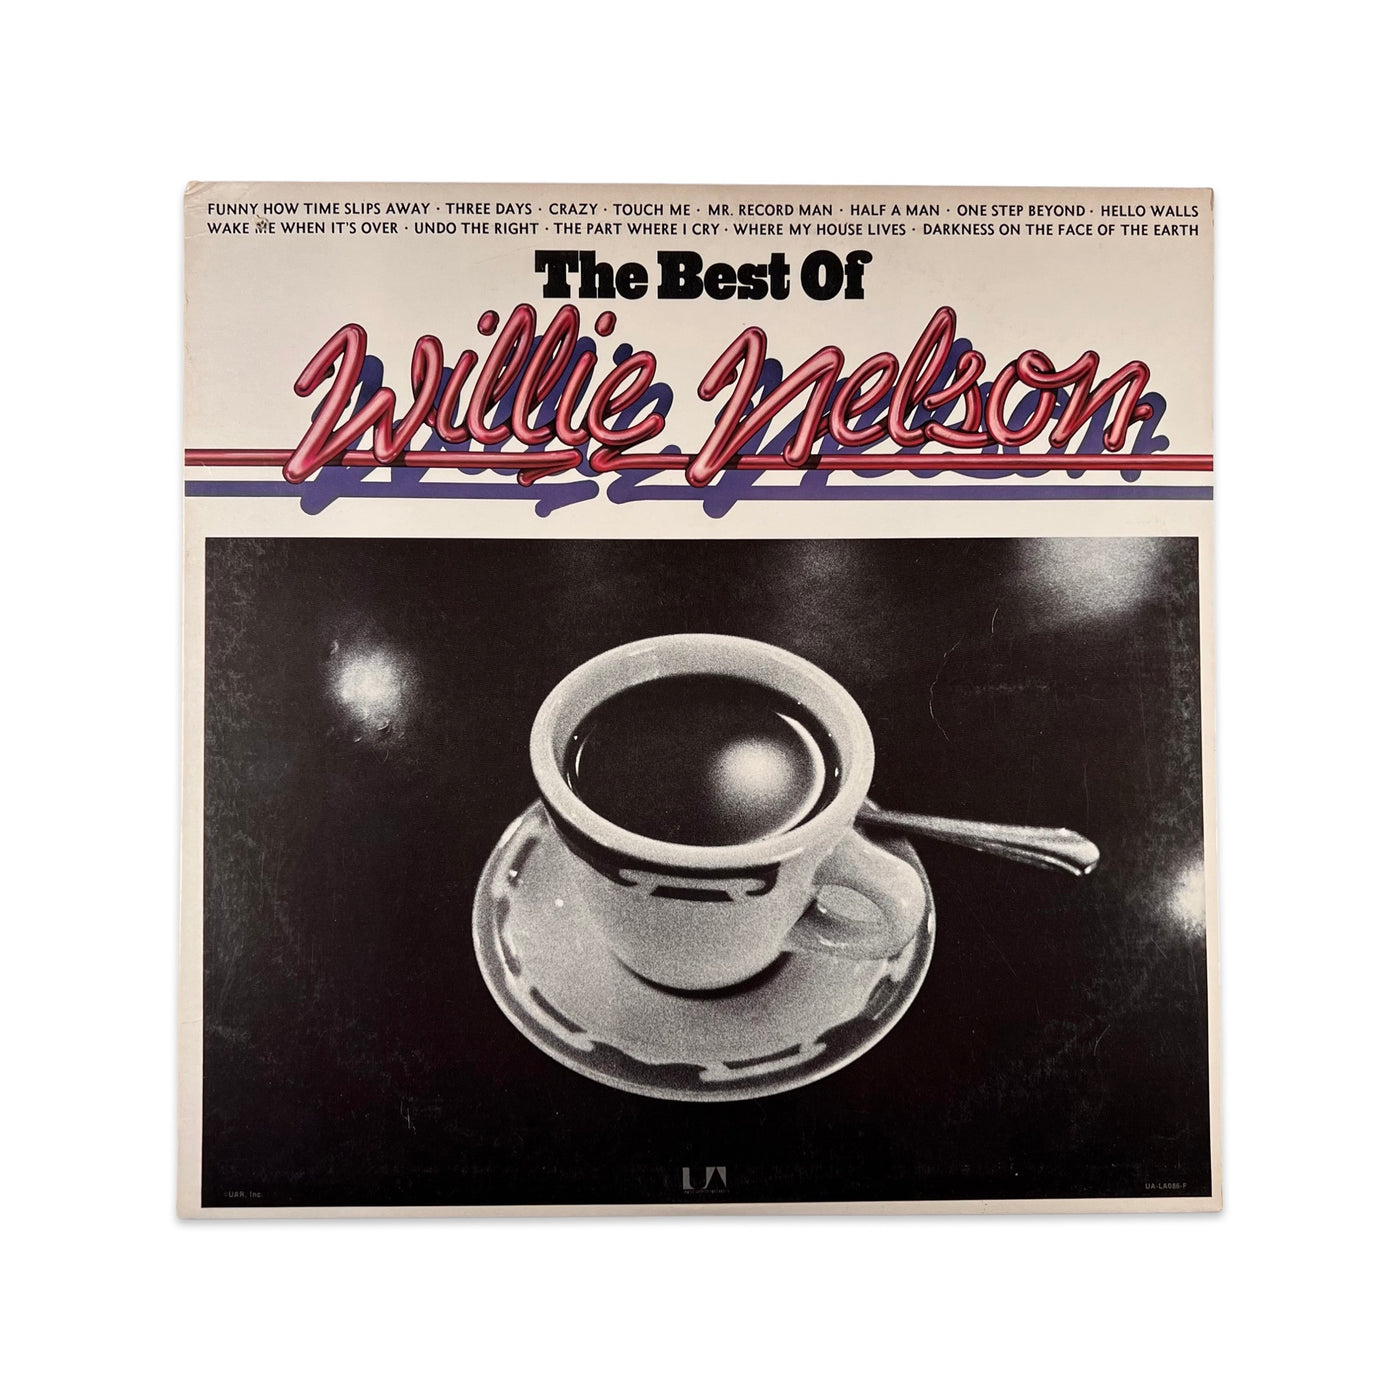 Willie Nelson – The Best Of Willie Nelson